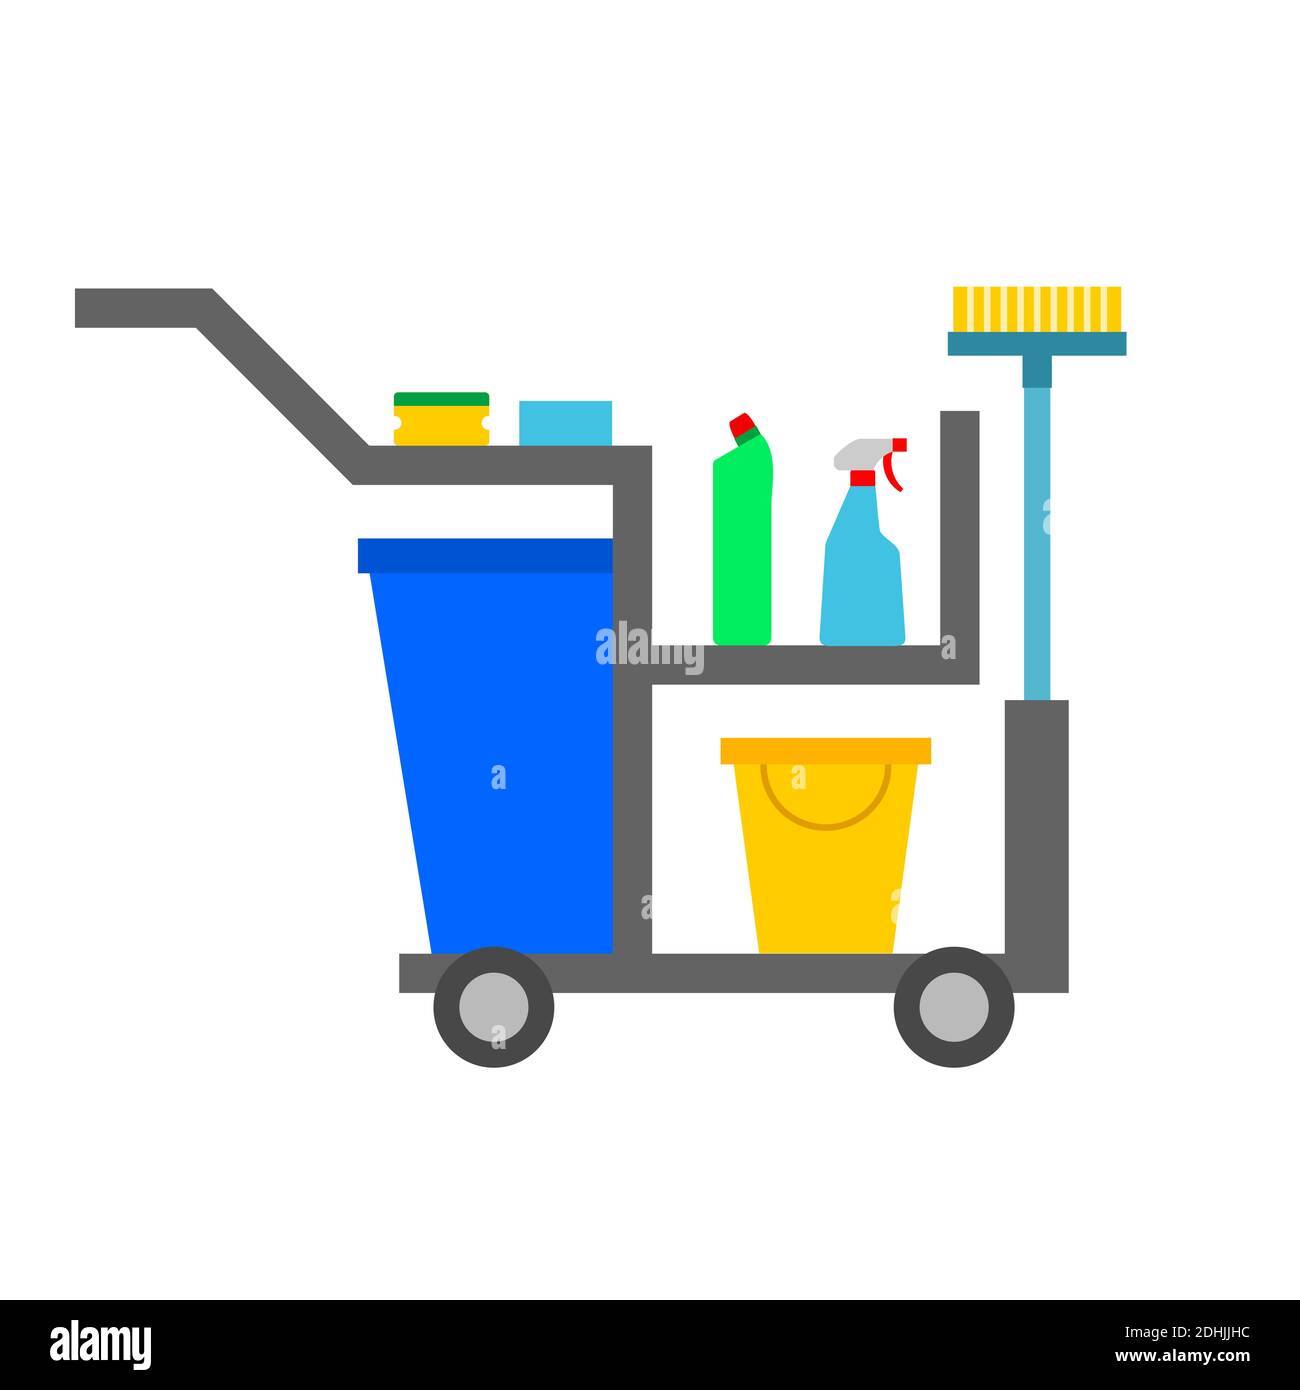 https://c8.alamy.com/comp/2DHJJHC/cleaning-trolley-cleaning-service-cart-bucket-broom-detergent-sponge-rag-sanitizer-white-background-janitors-equipment-room-cleaning-vector-2DHJJHC.jpg